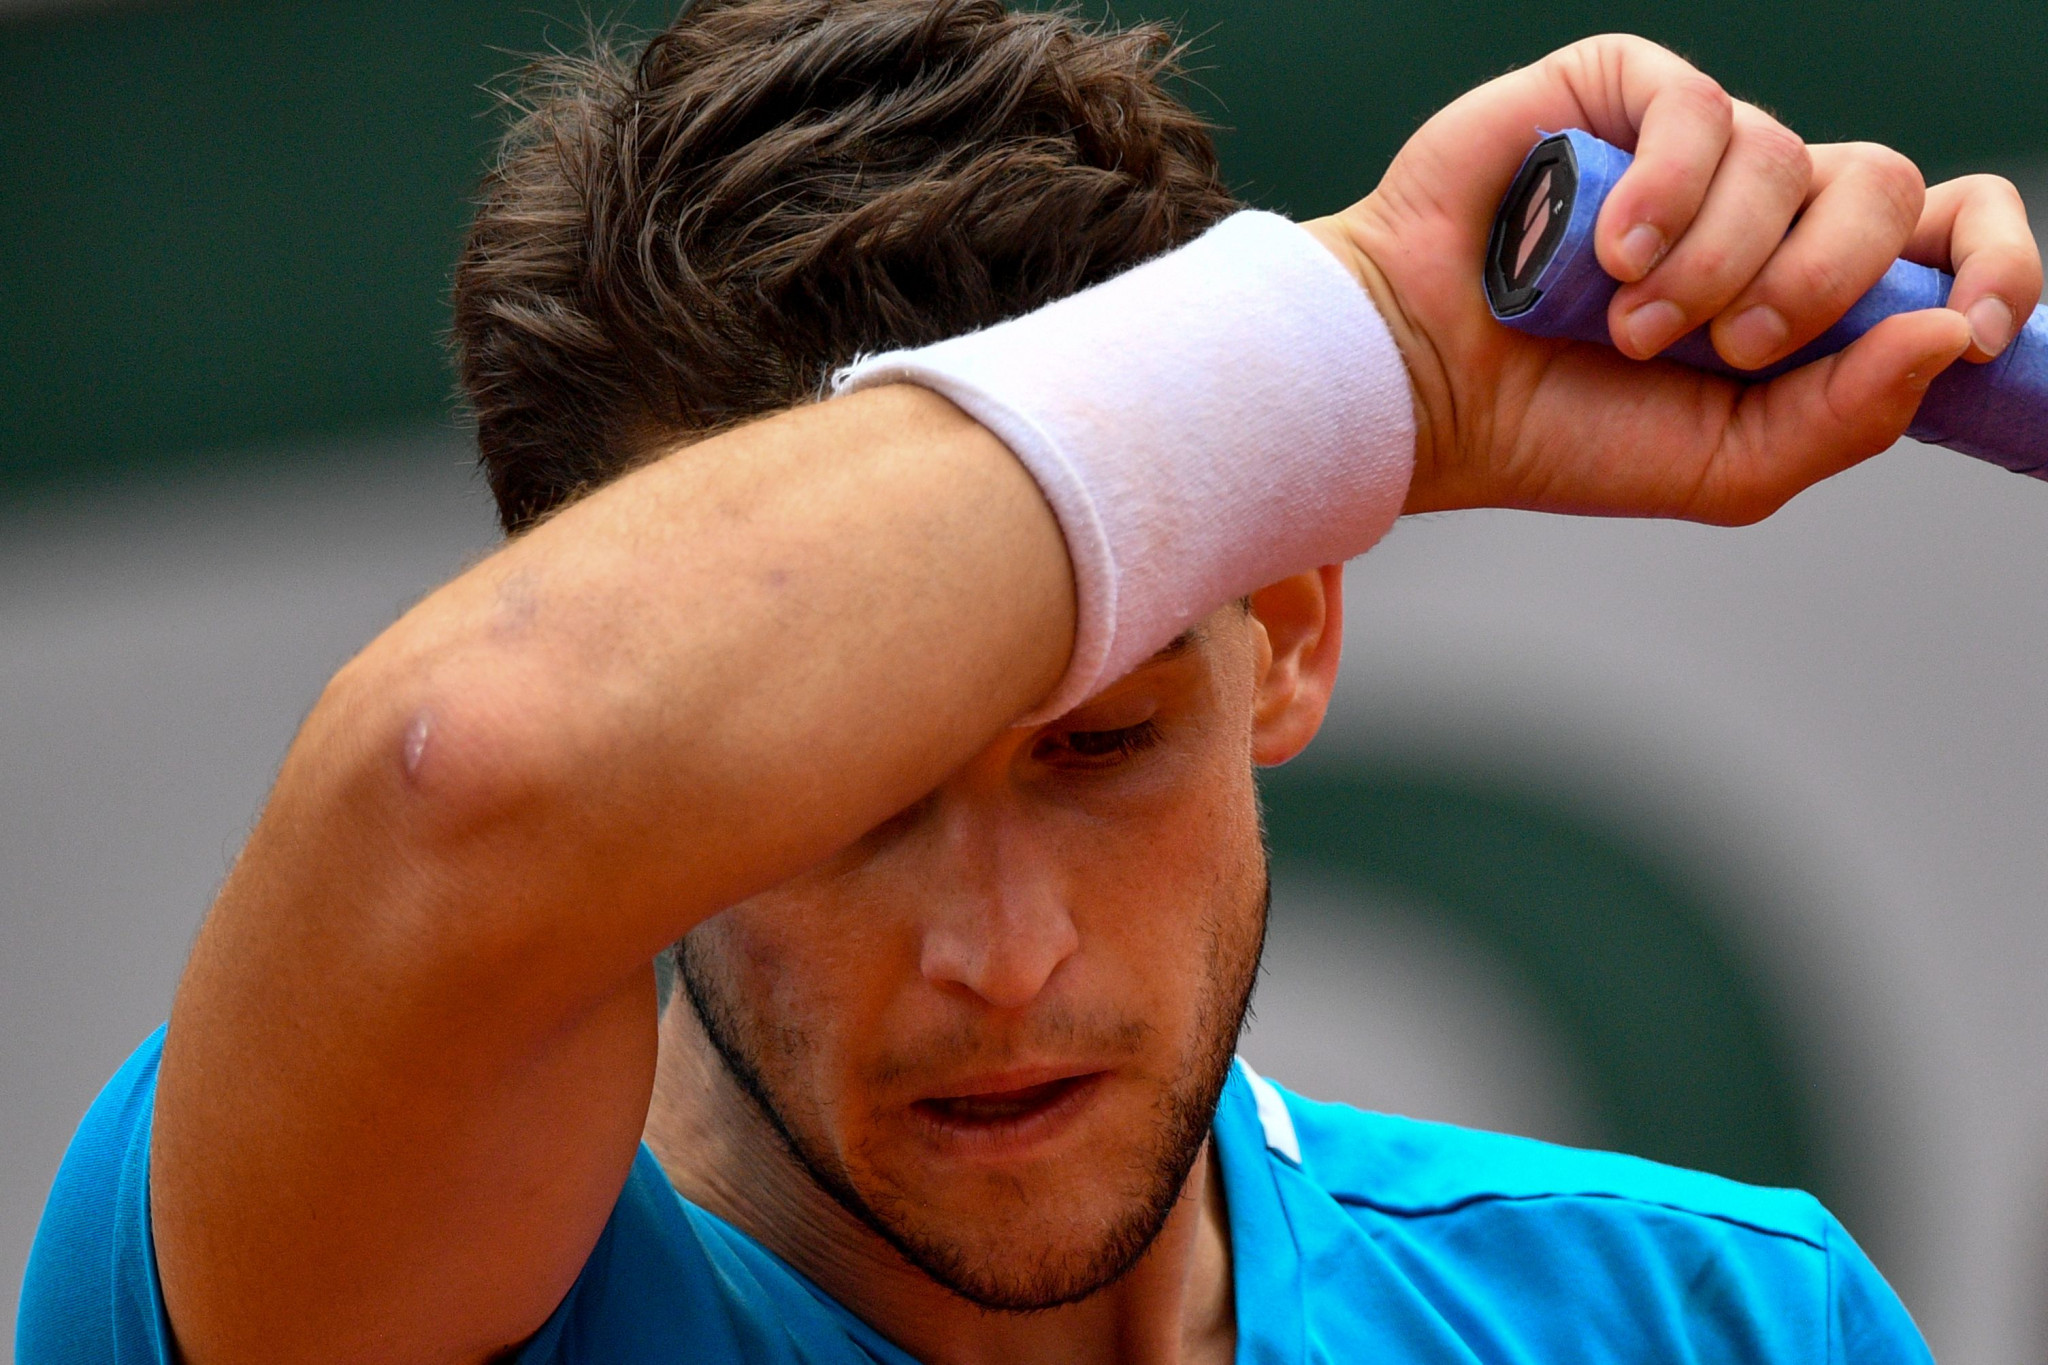 Thiem wipes his face during a gruelling match ©Getty Images